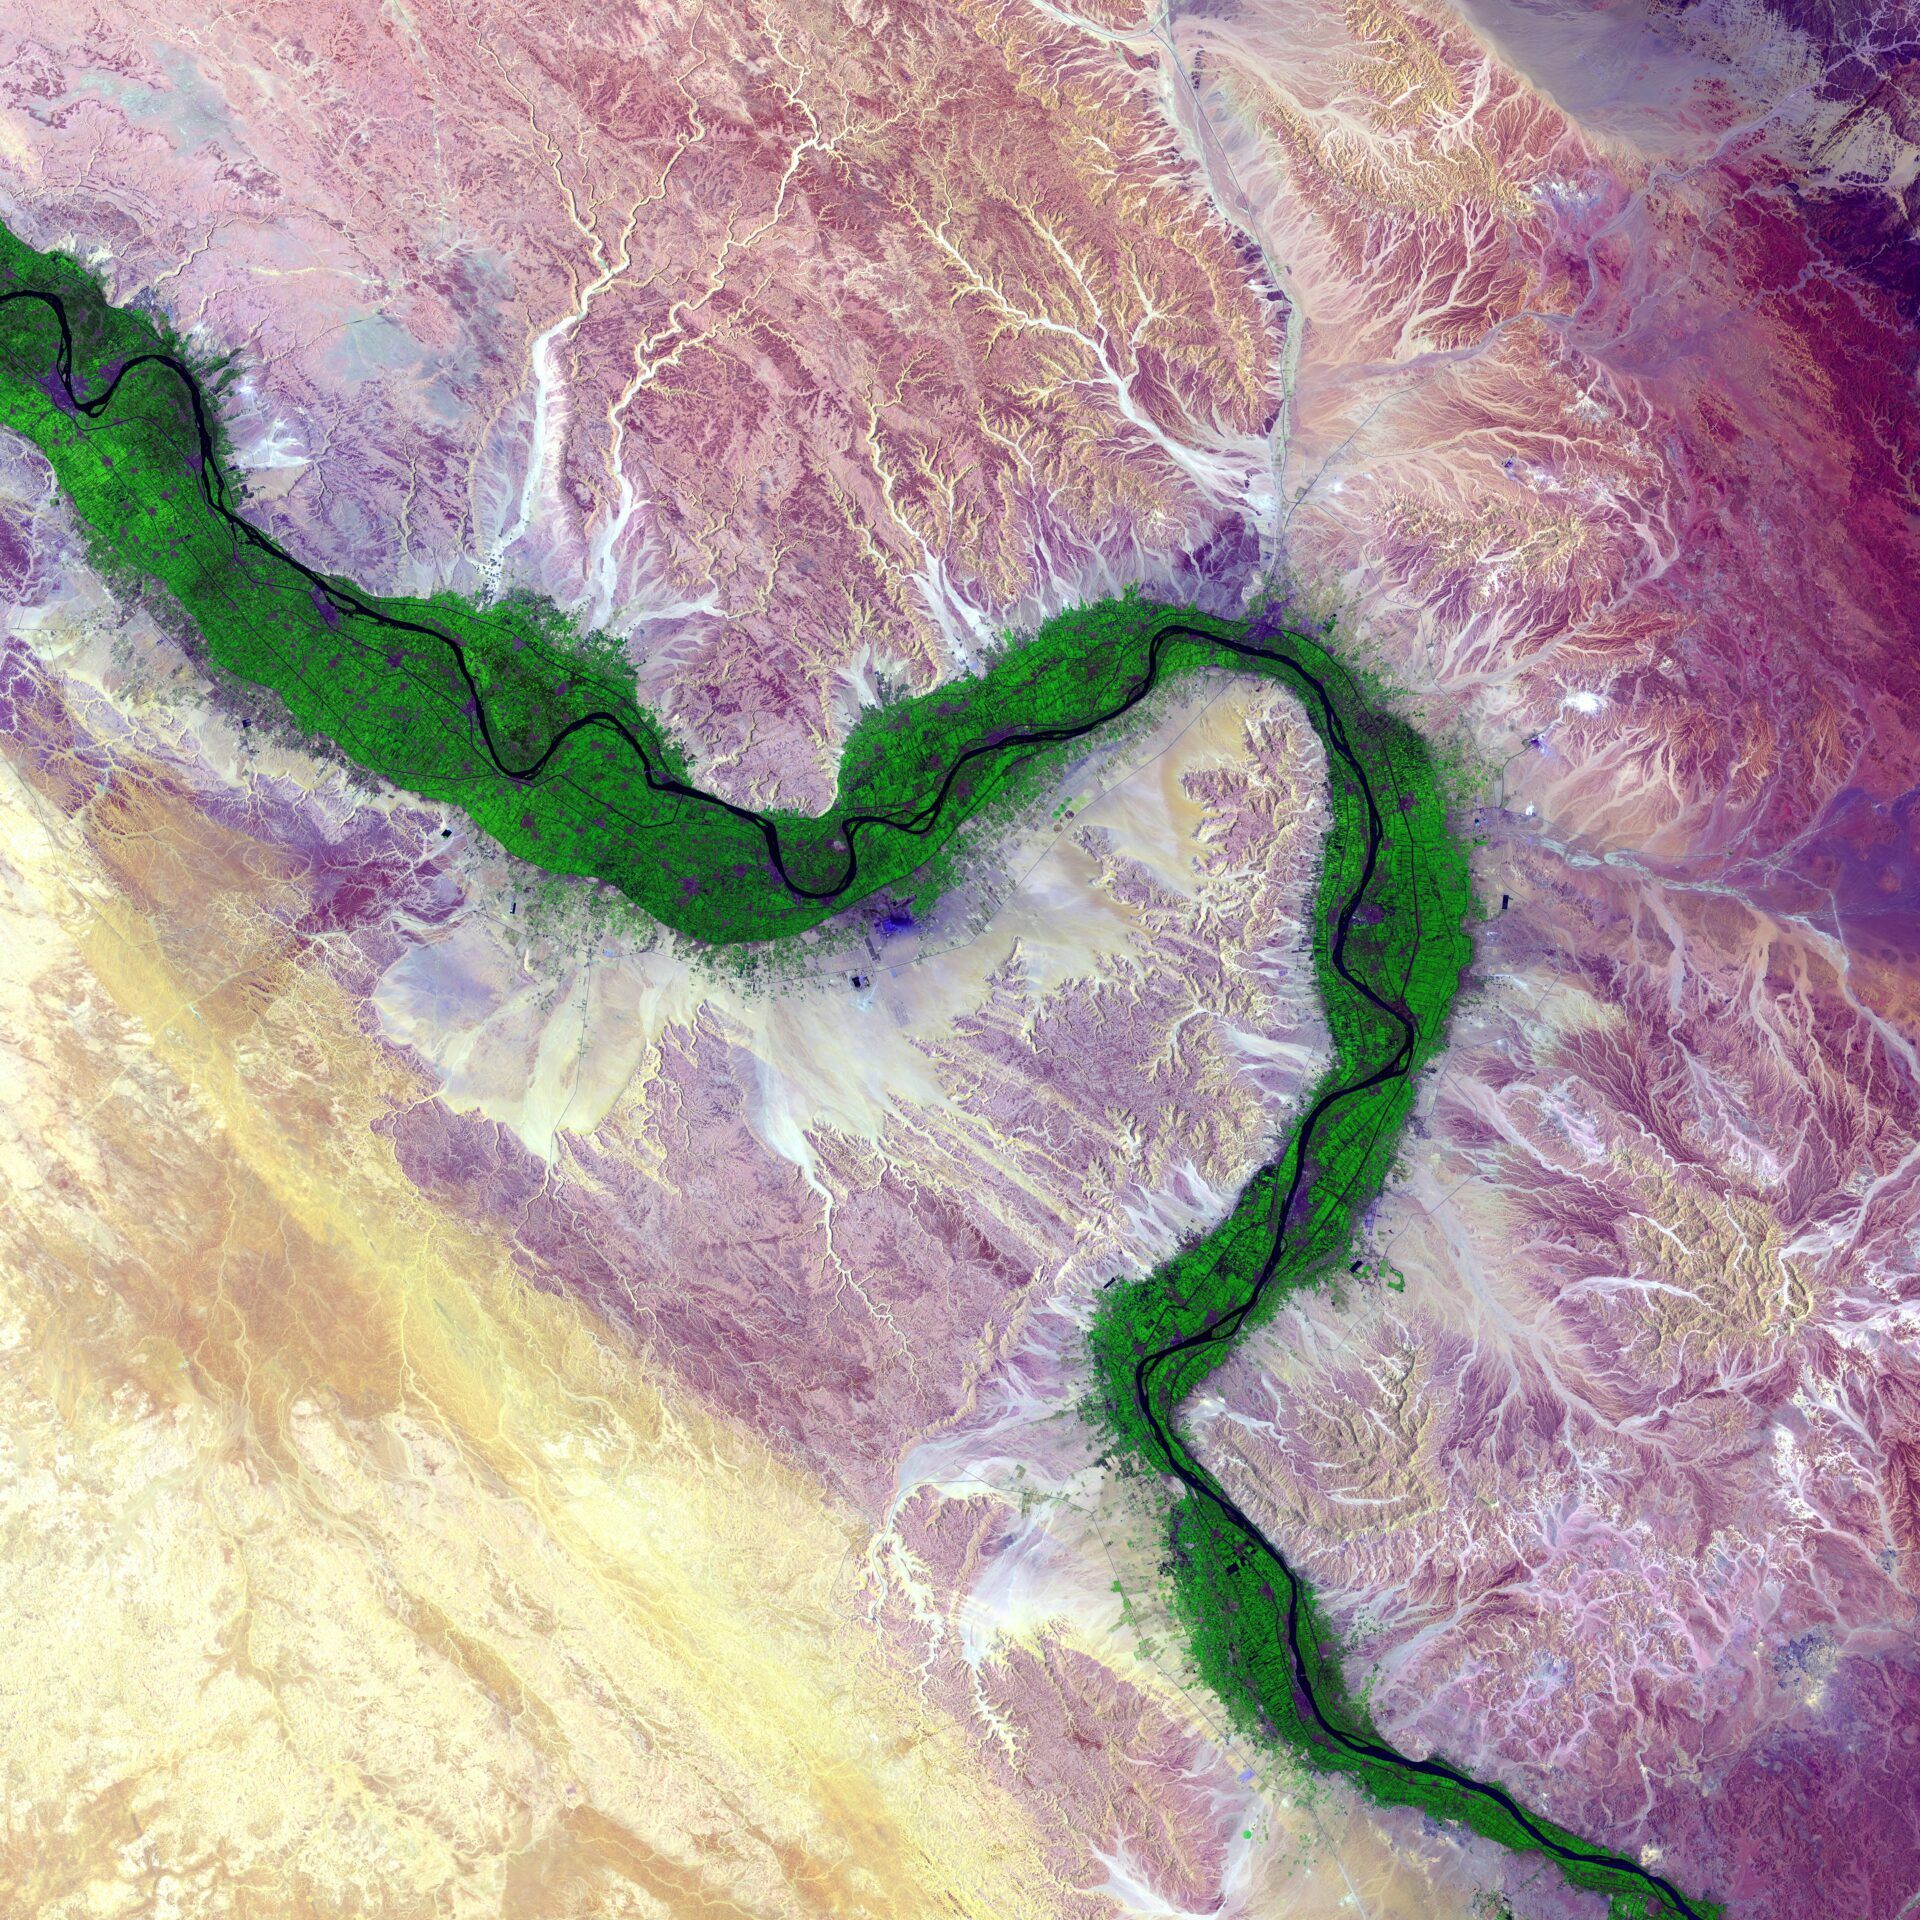 The Nile River in Egypt. "It is easy to see from this image why people have been drawn to the Nile River in Egypt for thousands of years." US Geological Survey via Unsplash.